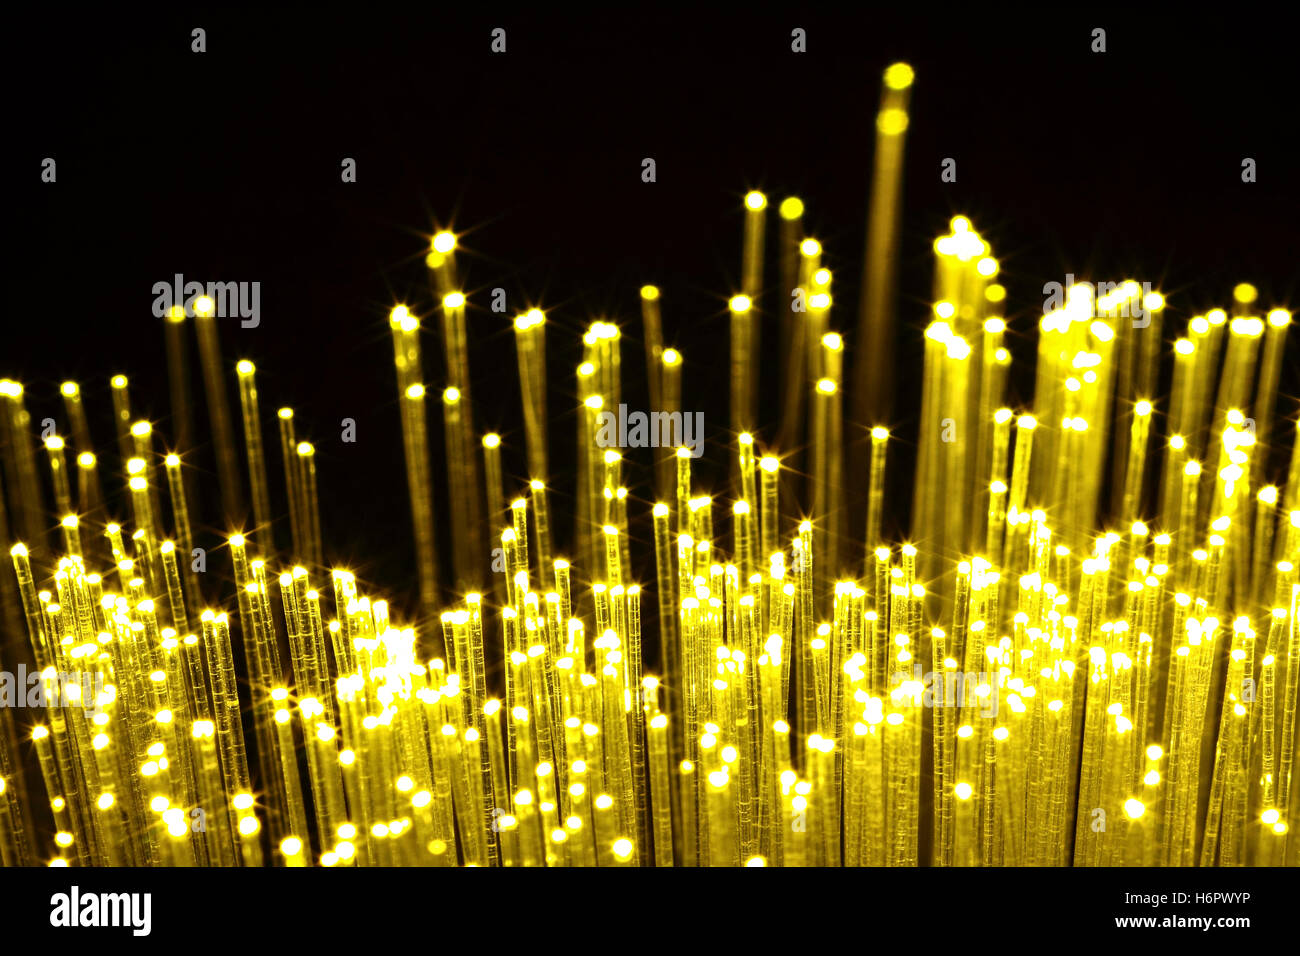 close up view of amber (yellow) fibre optic strands conceptual use for information,digital transfer of data,internet,science and technology use Stock Photo